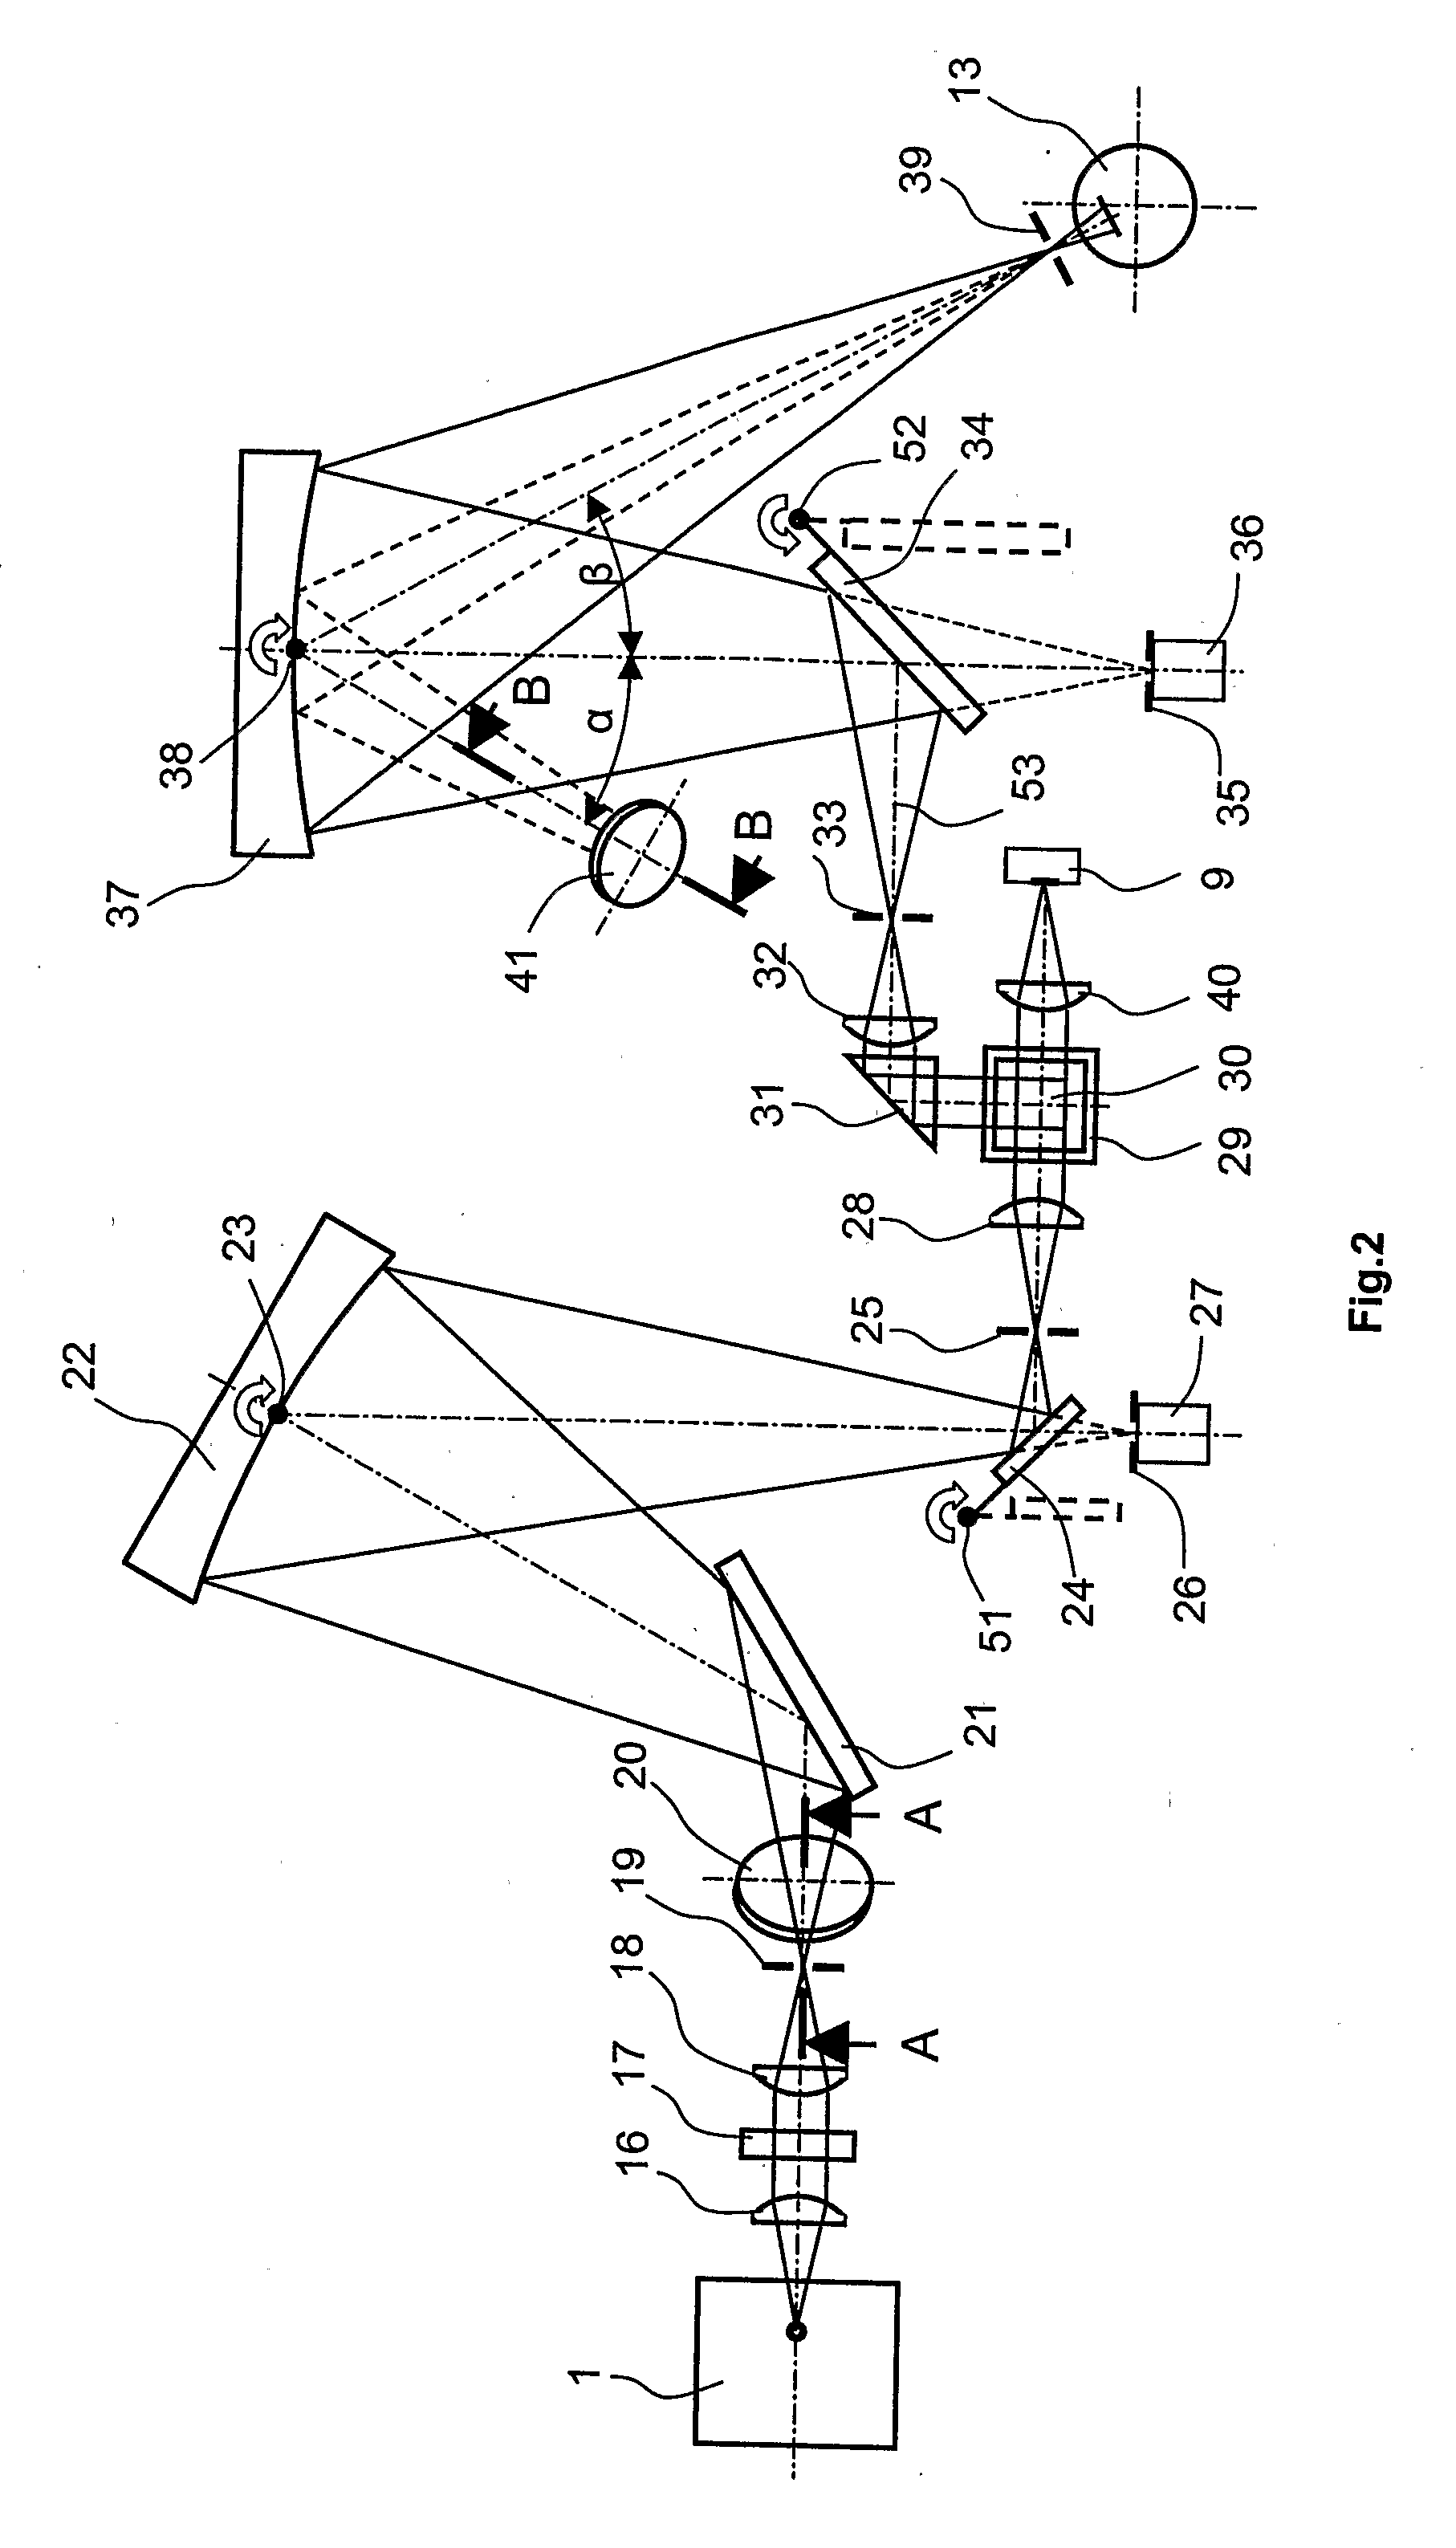 Portable Device and Method for On-Site Detection and Quantification of Drugs